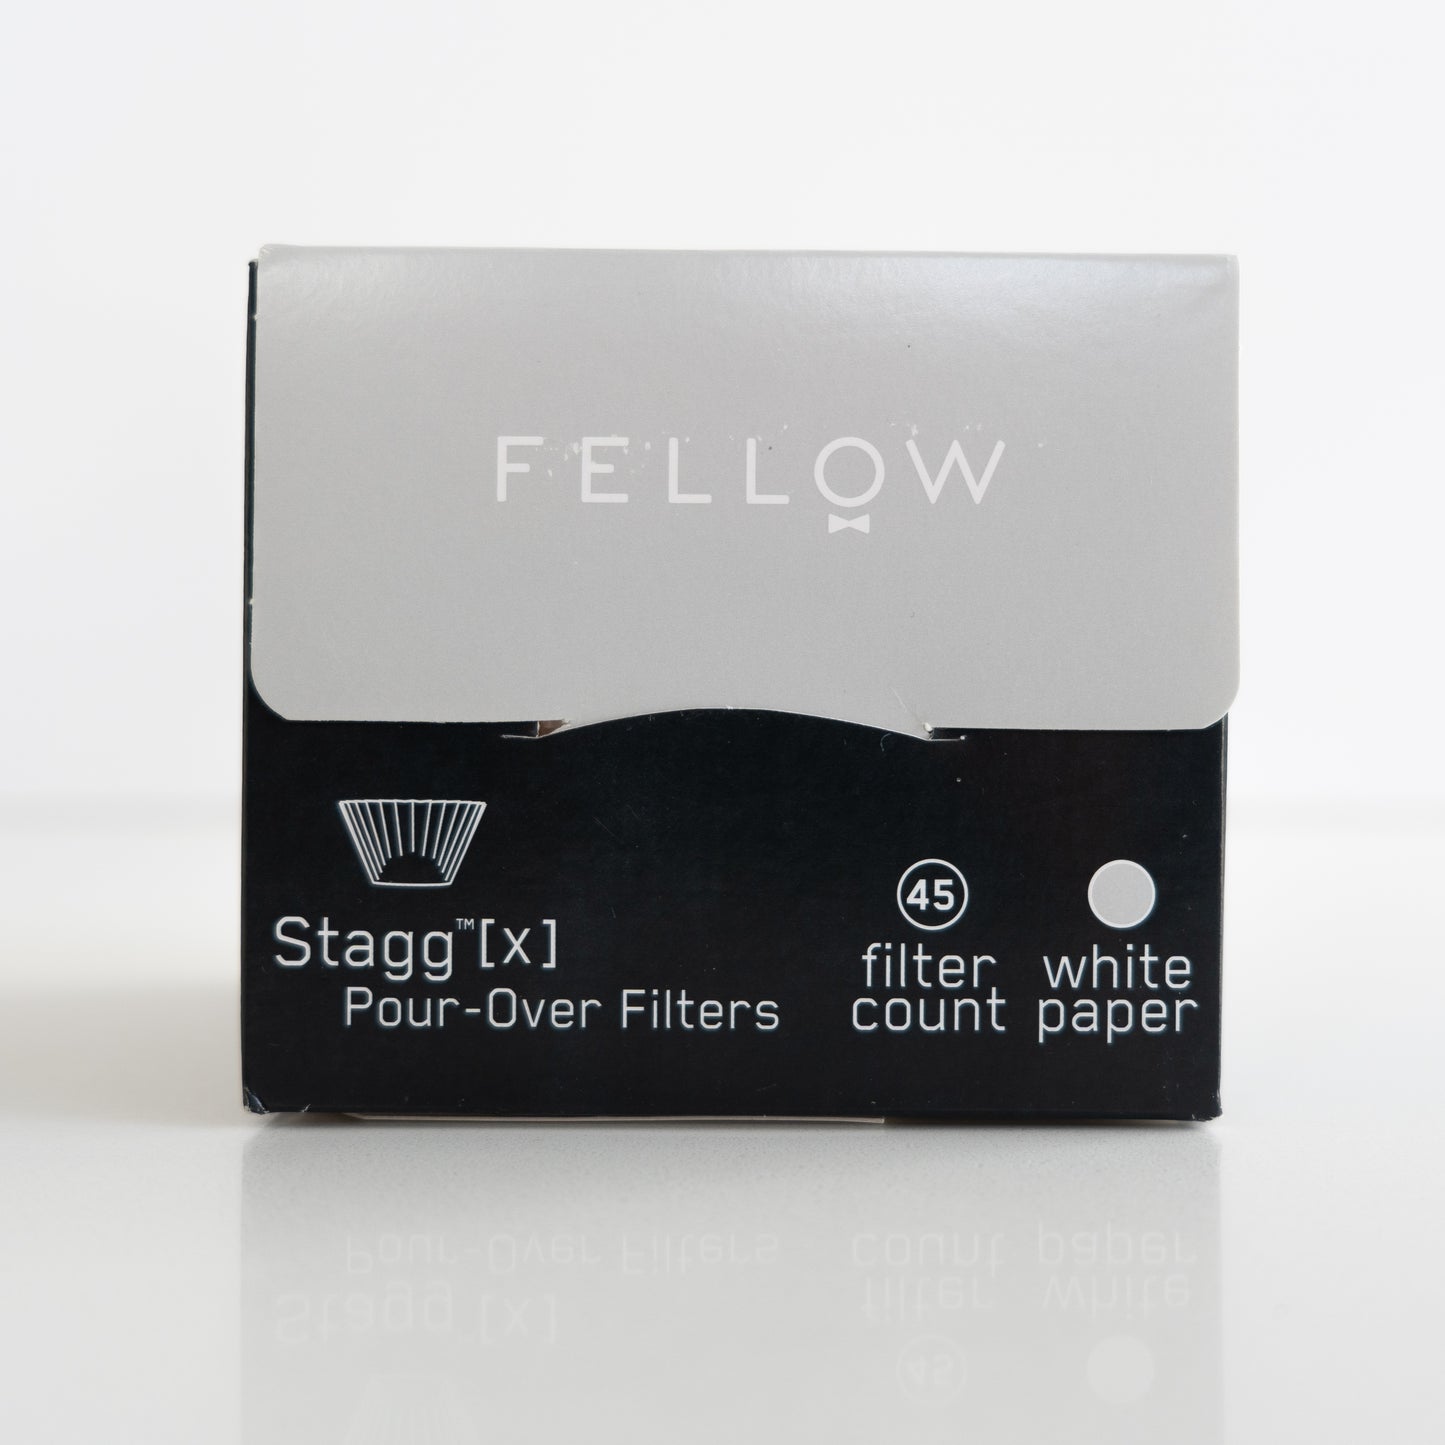 Fellow Stagg X Pour-Over Filters (45)